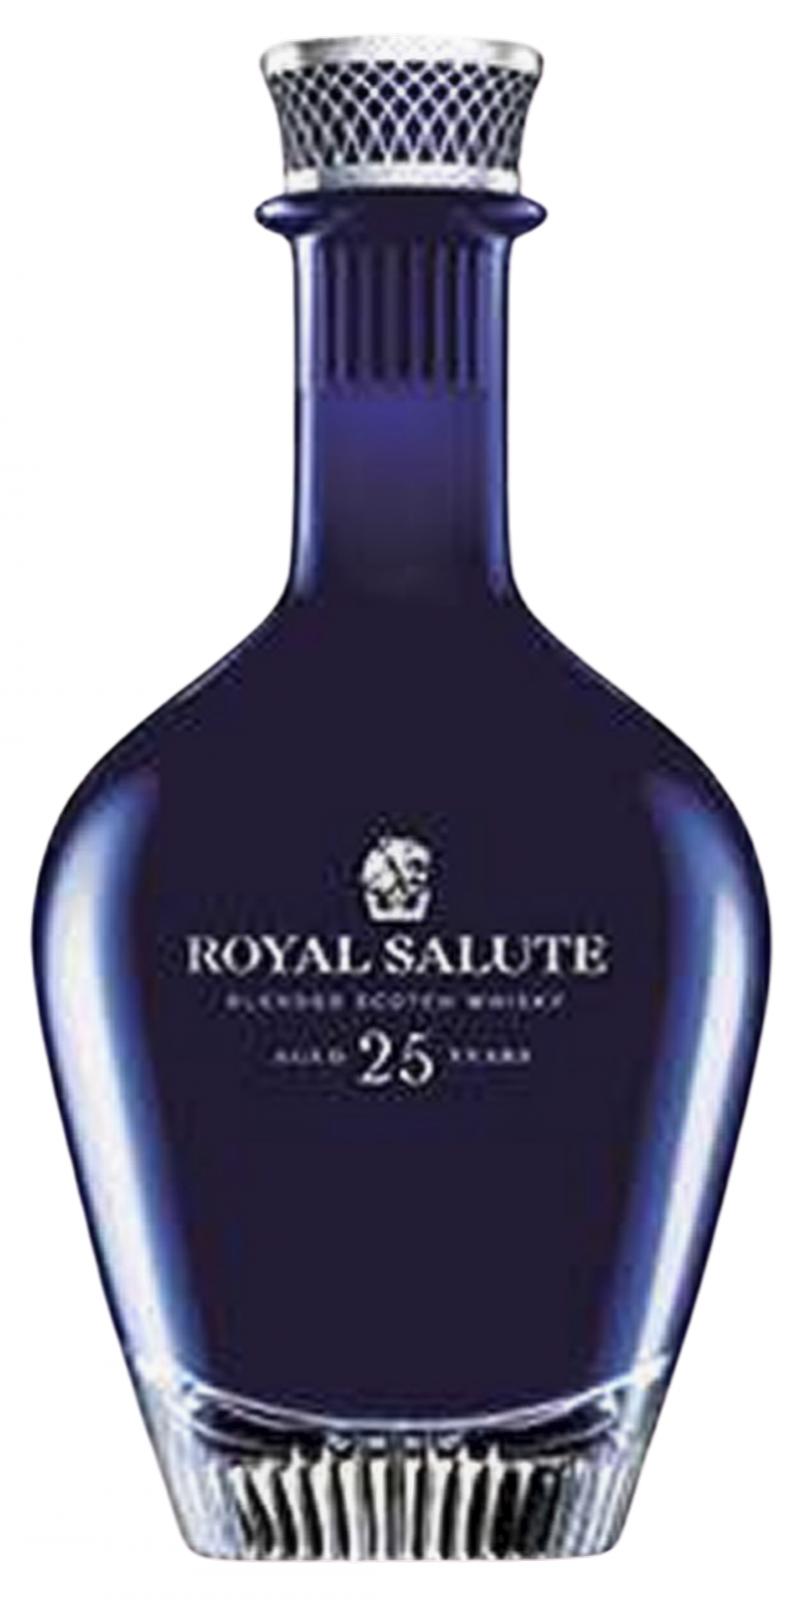 Royal Salute 25-Year-Old - Ratings And Reviews - Whiskybase